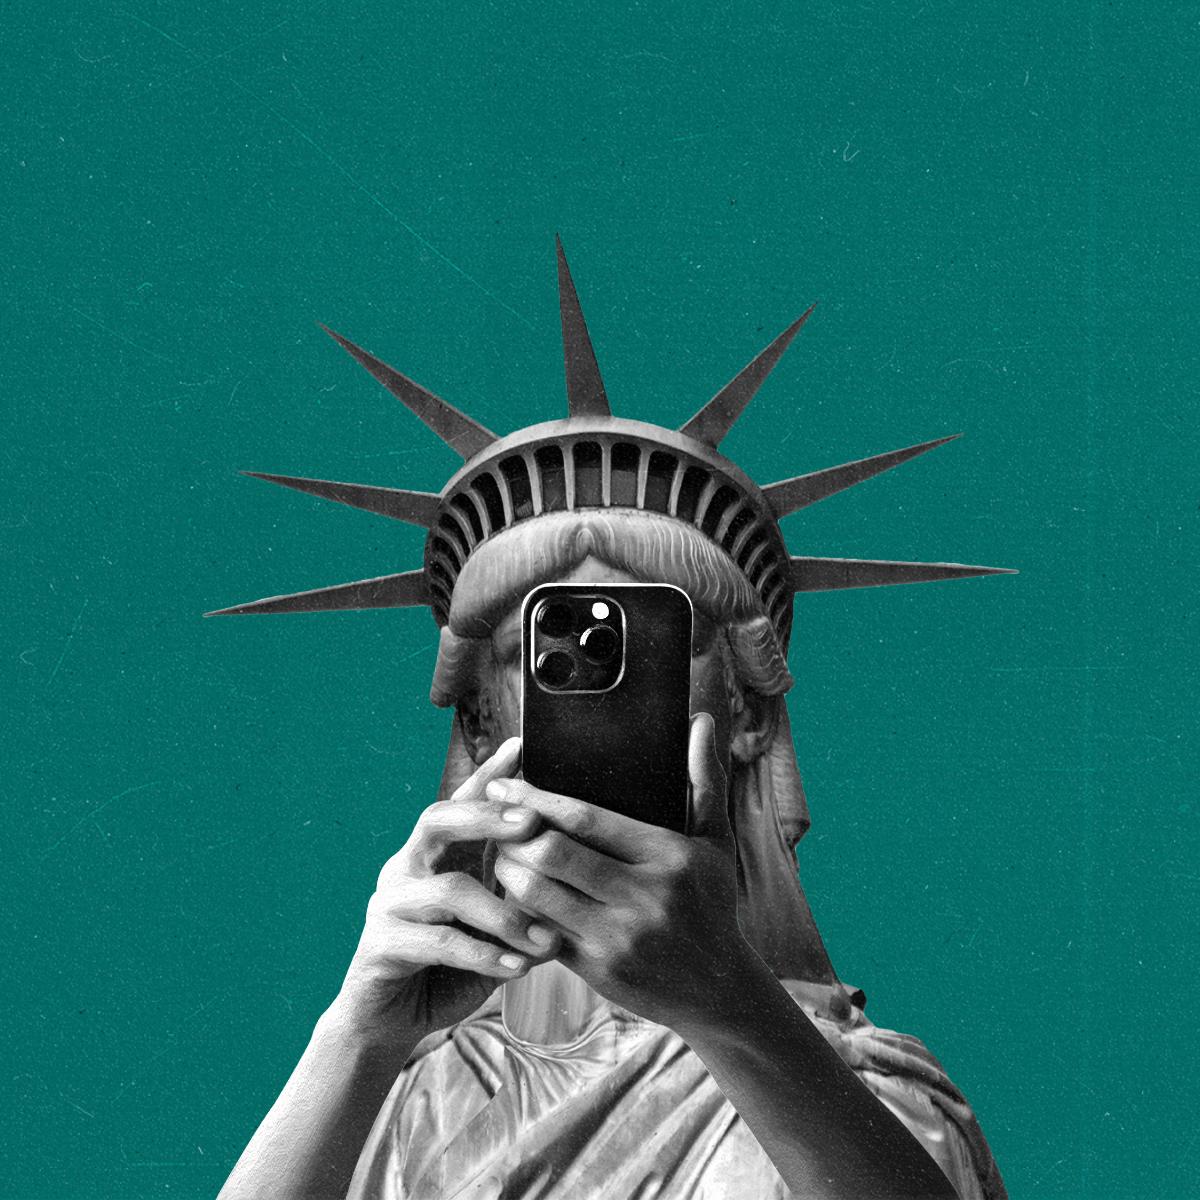 The statue of liberty takes a mirror selfie obscuring its face.